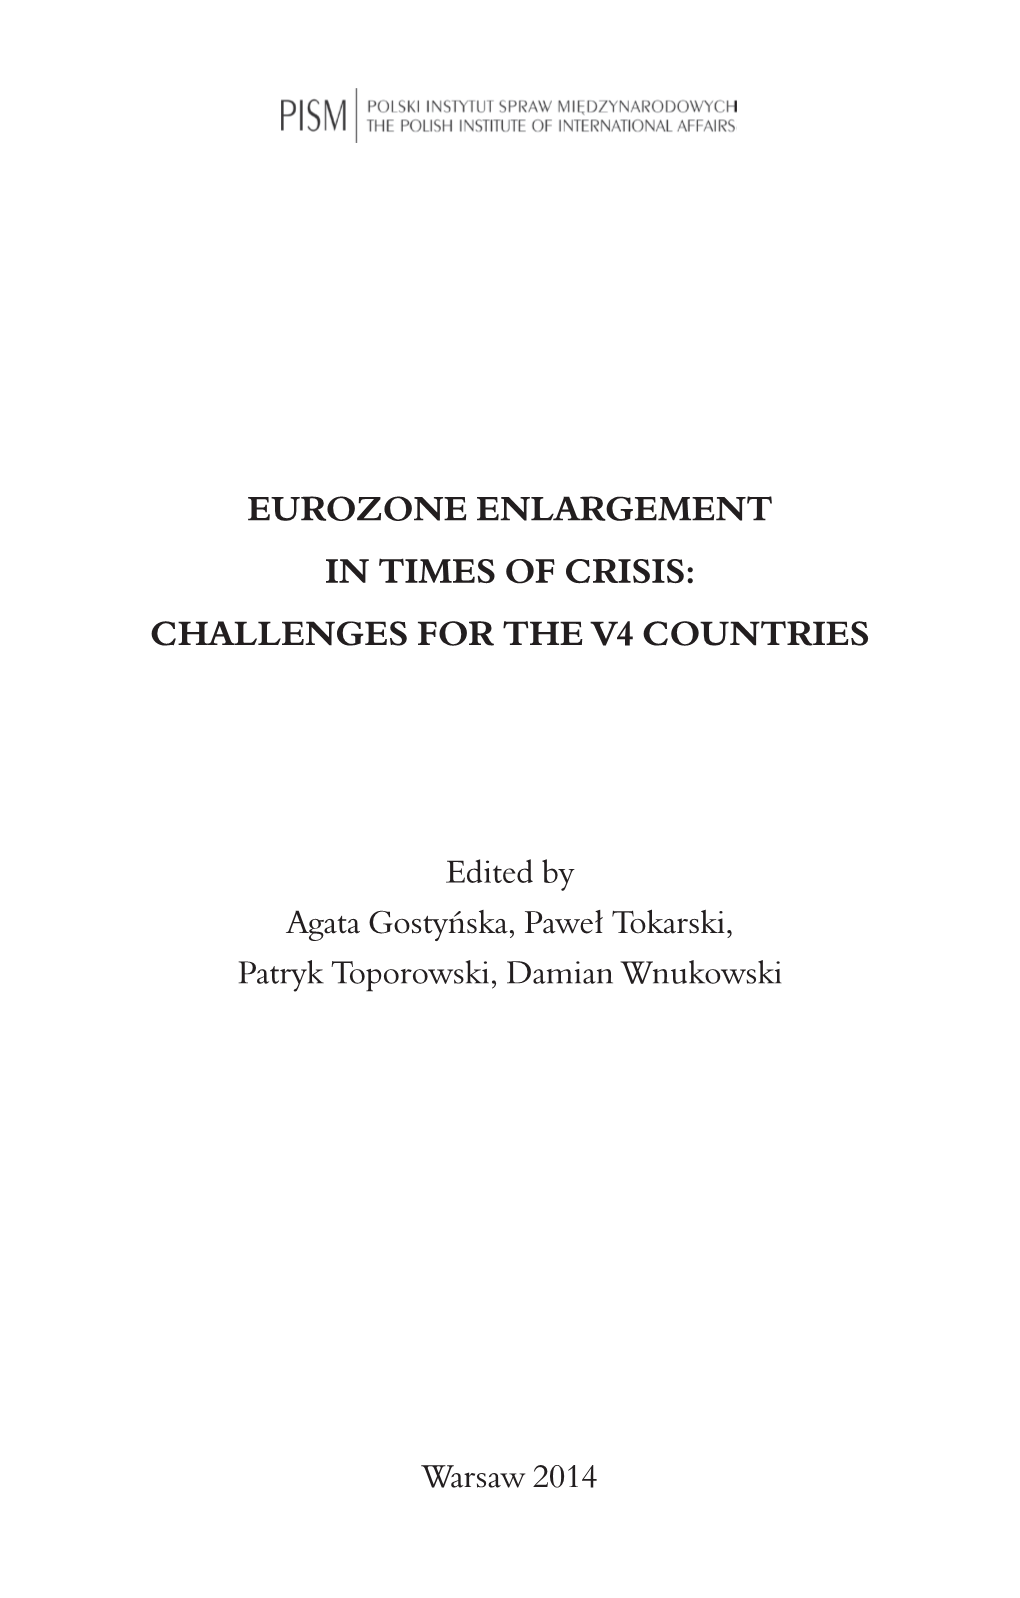 Eurozone Enlargement in Times of Crisis: Challenges for the V4 Countries